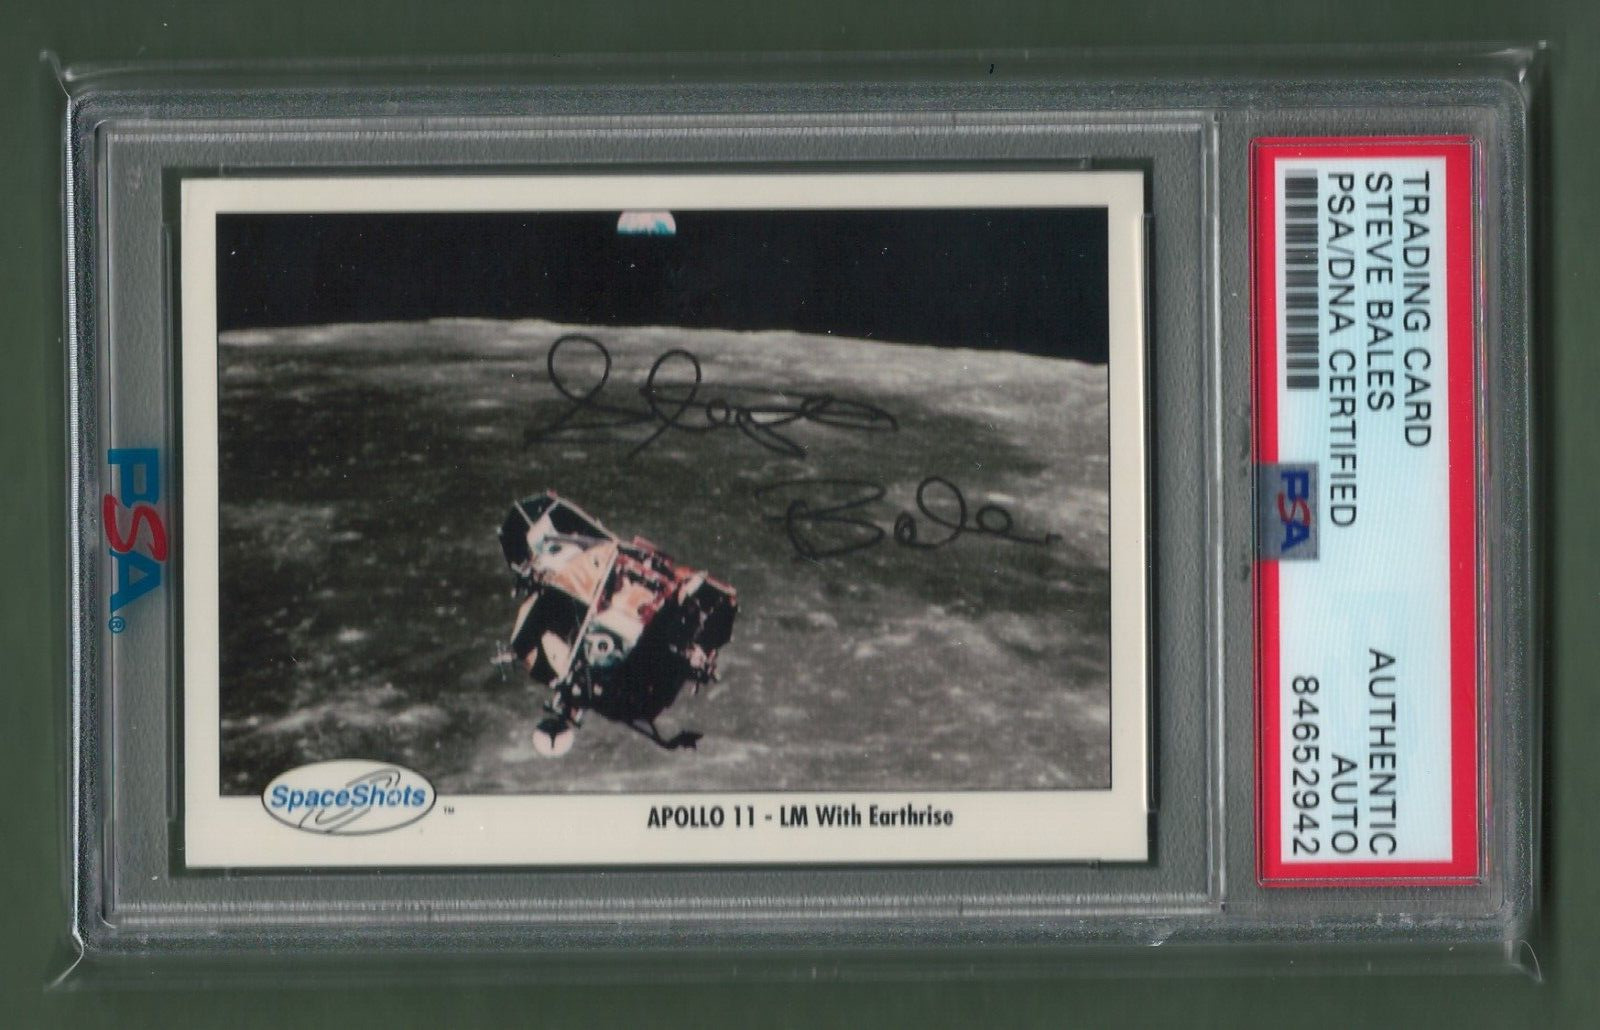 Steve Bales Autographed Signed 1990 NASA Spaceshots Card PSA/DNA Certified